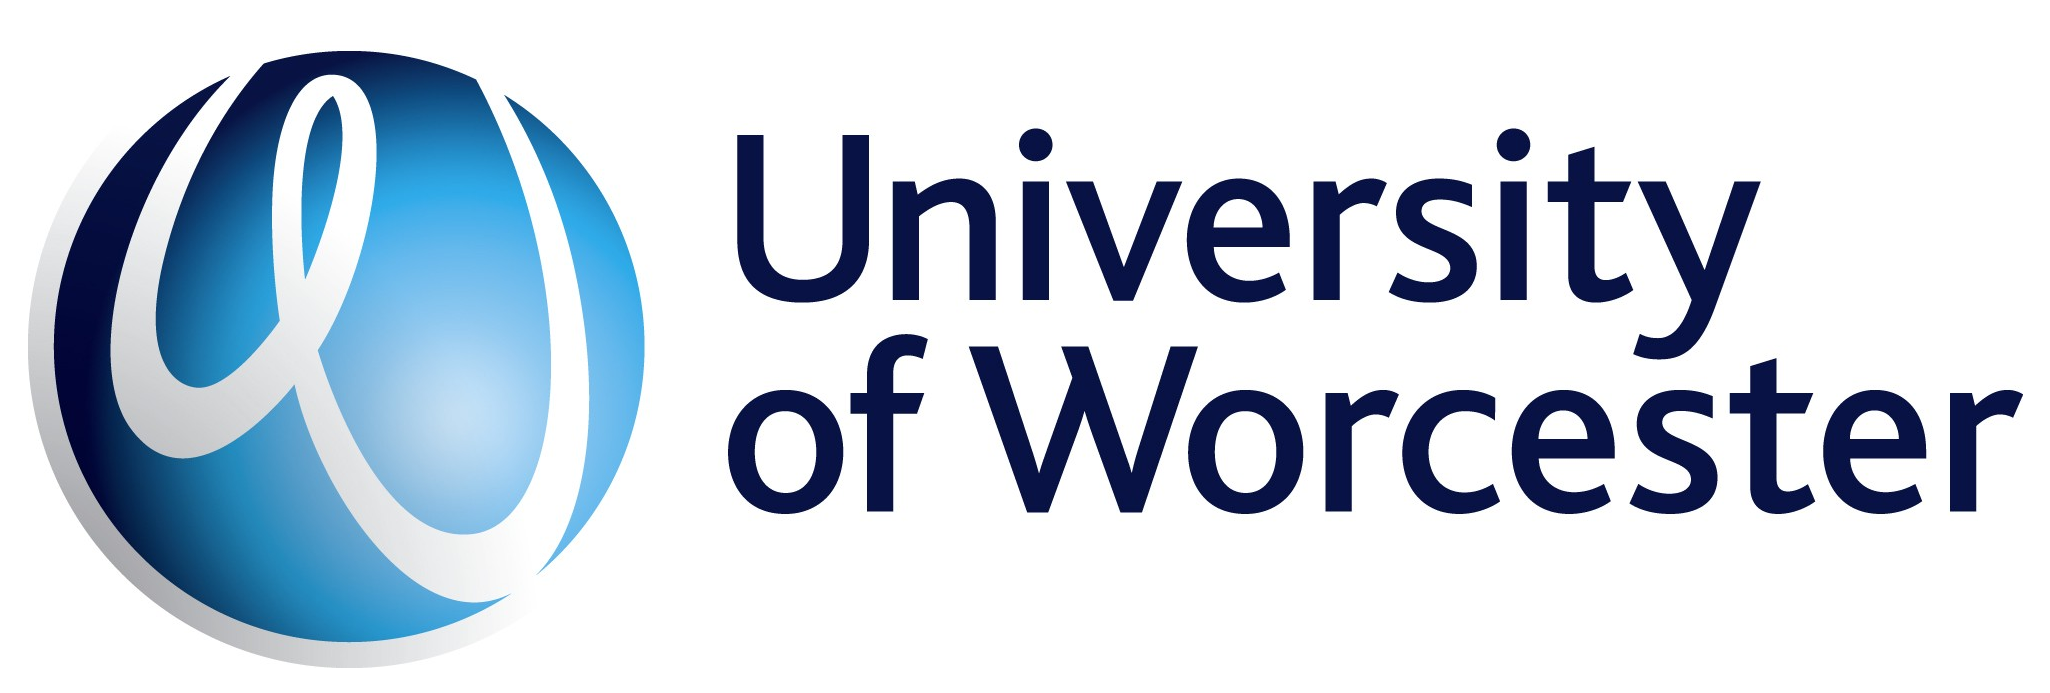 The University of Worcester